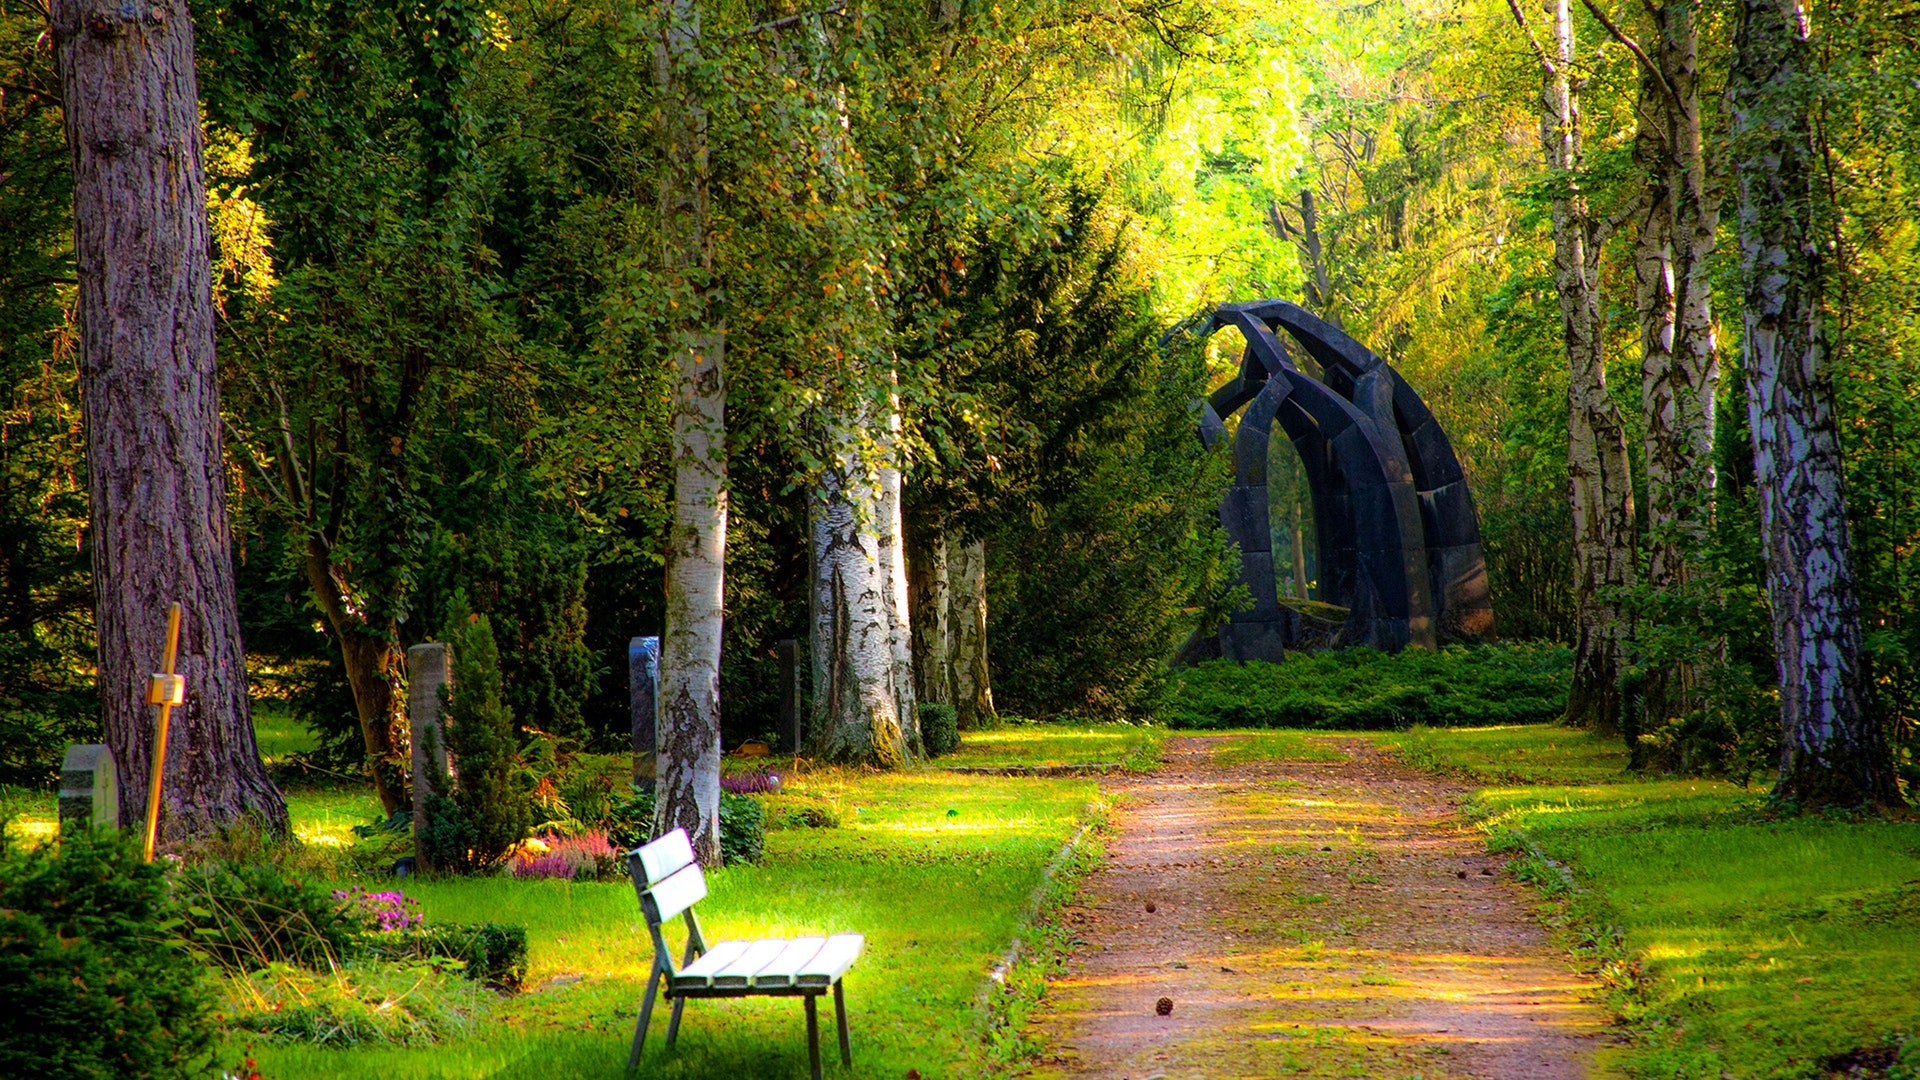 General 1920x1080 park trees plants bench dirt road grass monuments cemetery